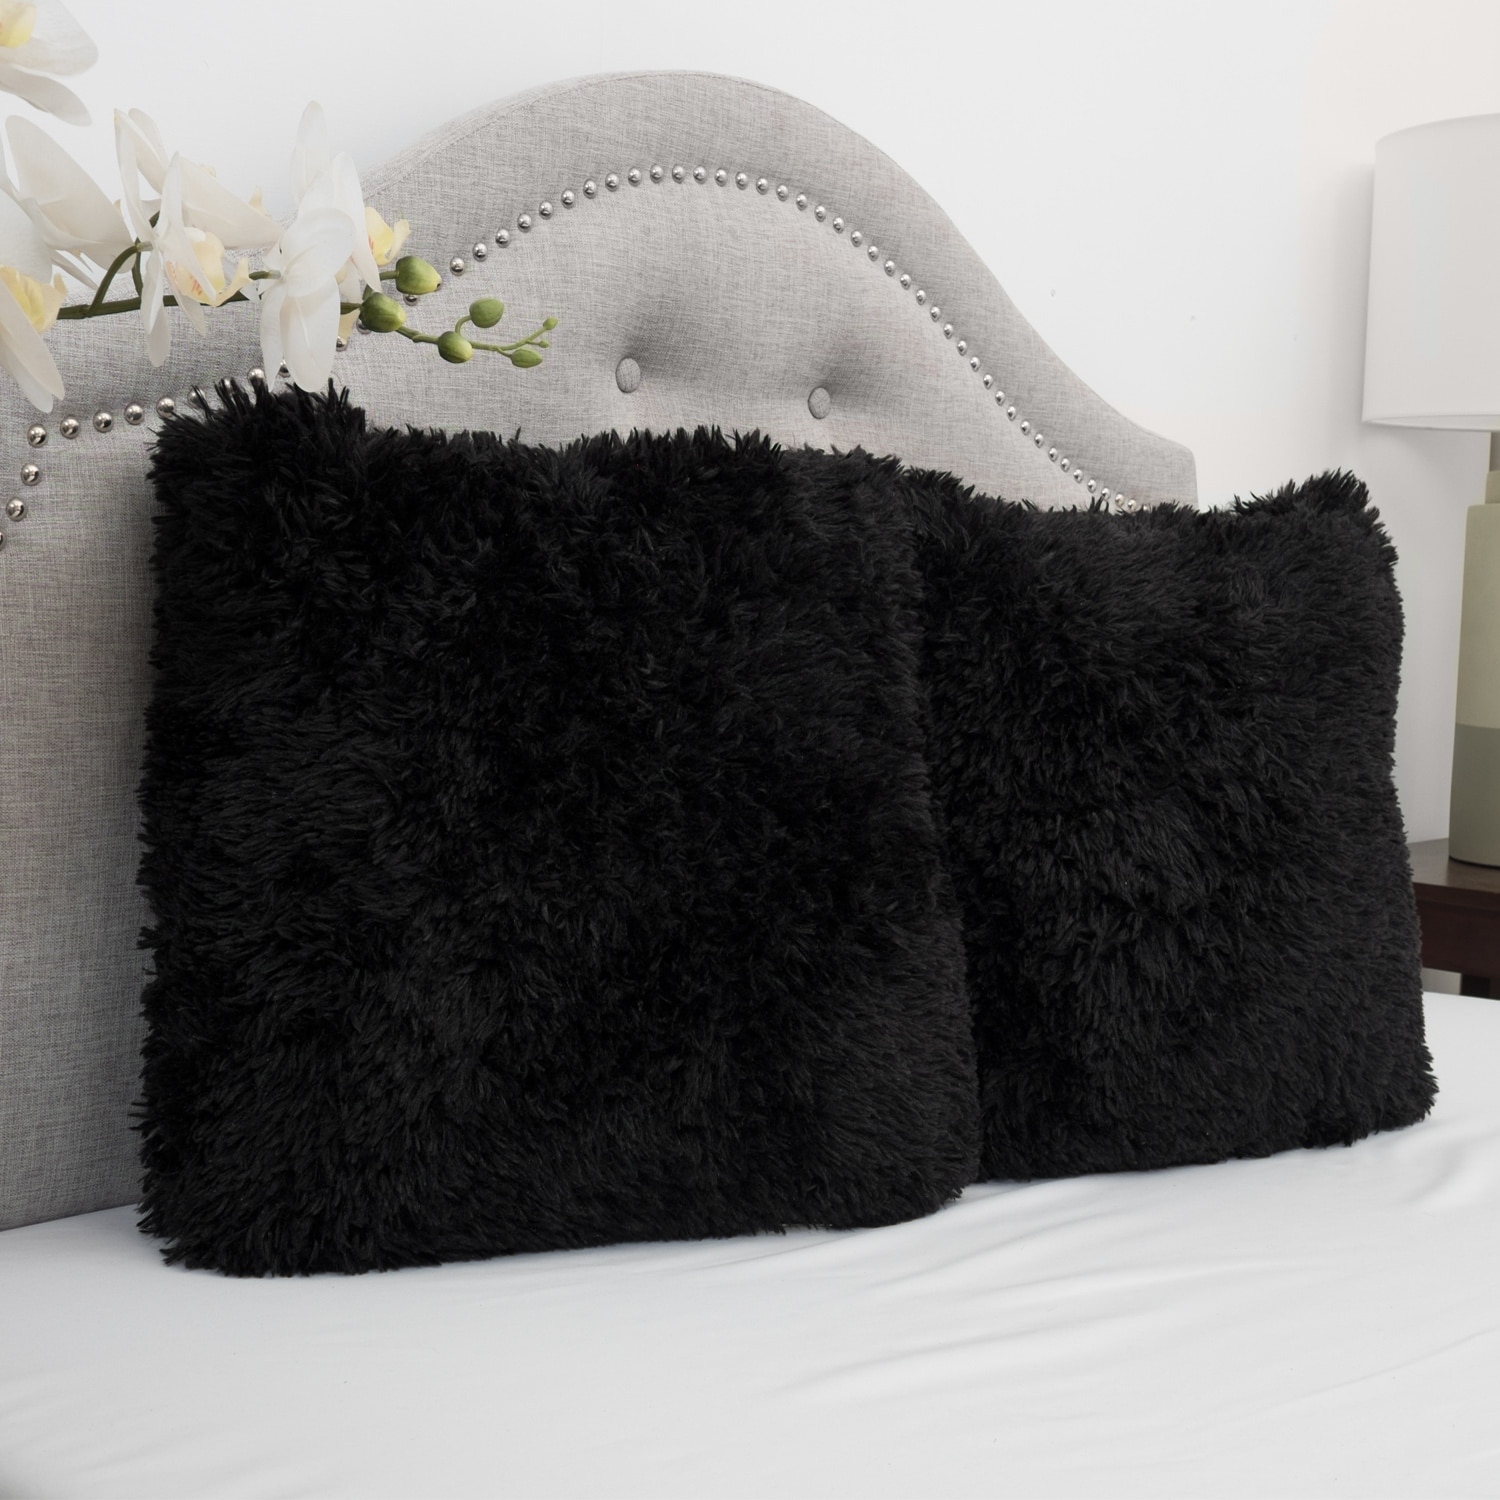 Pillows, 18 X 18 Square, Insert Included, Decorative Throw, Accent, Sofa,  Couch, Bedroom, Hypoallergenic - Bed Bath & Beyond - 18227492